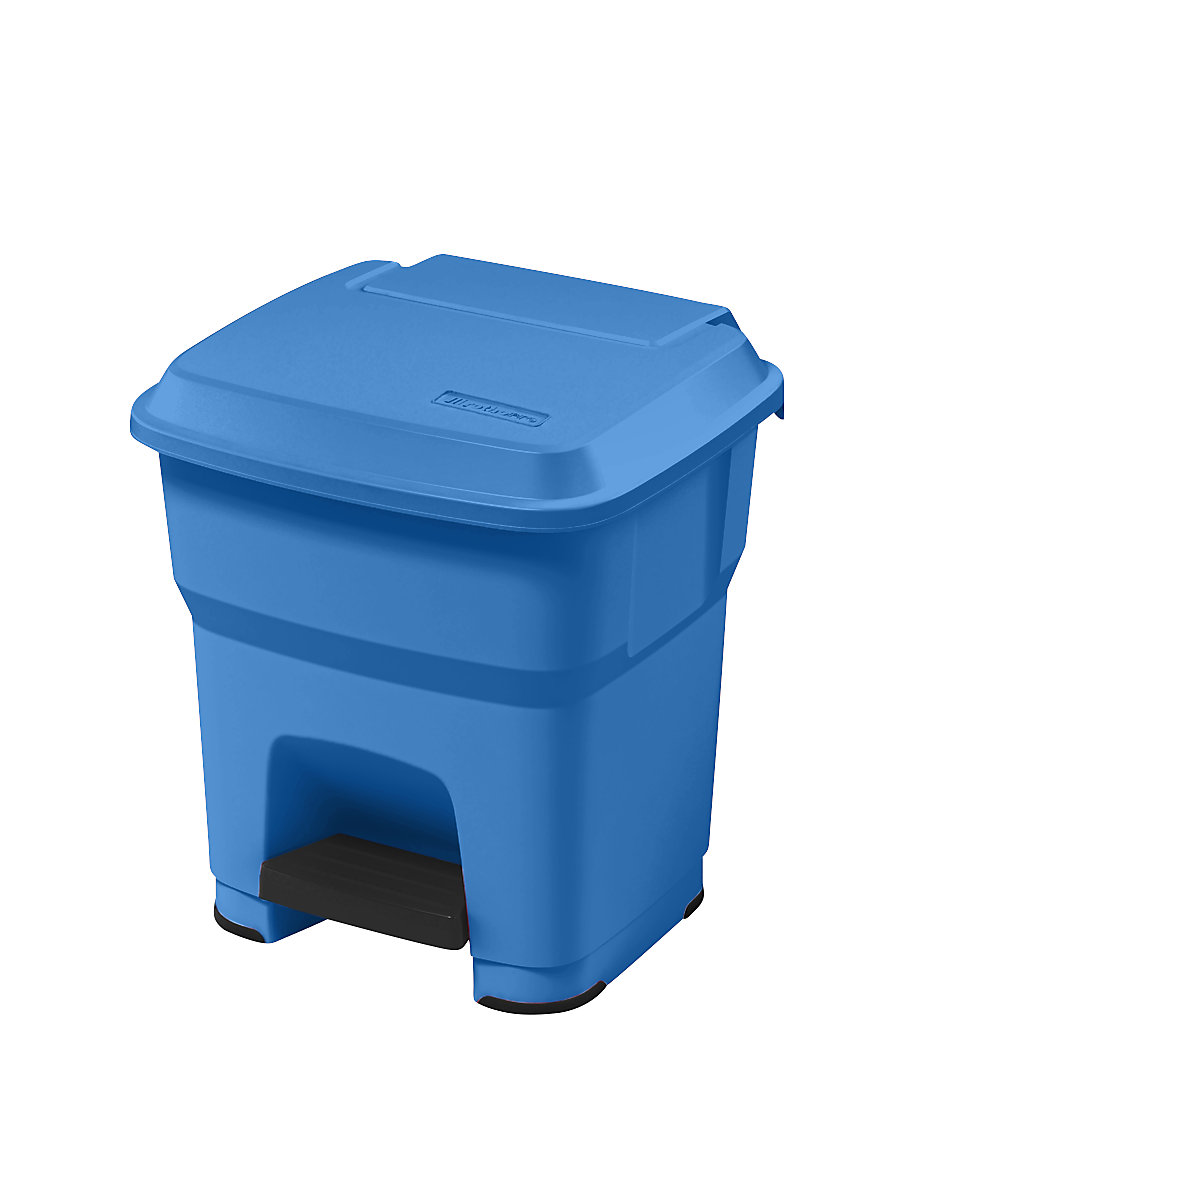 HERA waste collector with pedal – rothopro, capacity 35 l, WxHxD 390 x 440 x 390 mm, blue-9